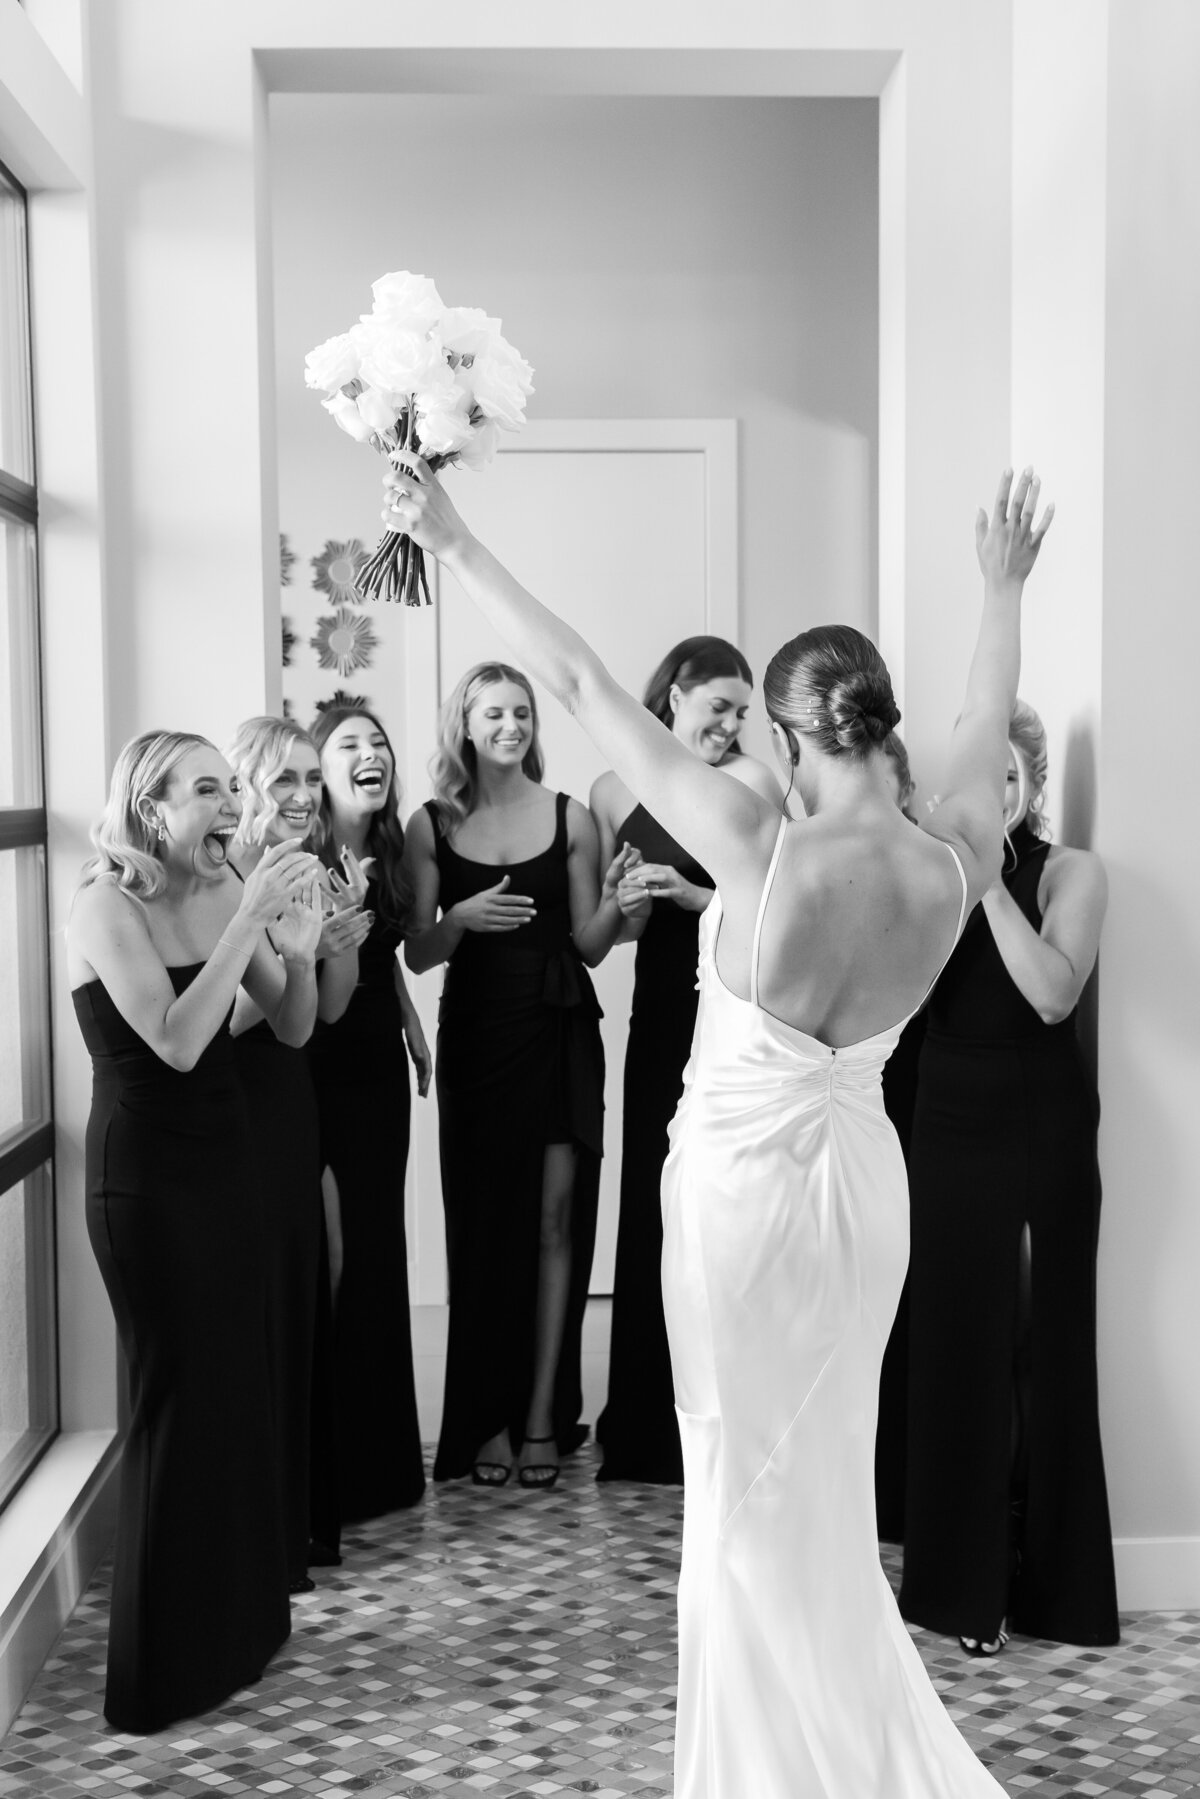 Chic bride gives her bridesmaids a first look of her in her wedding gown